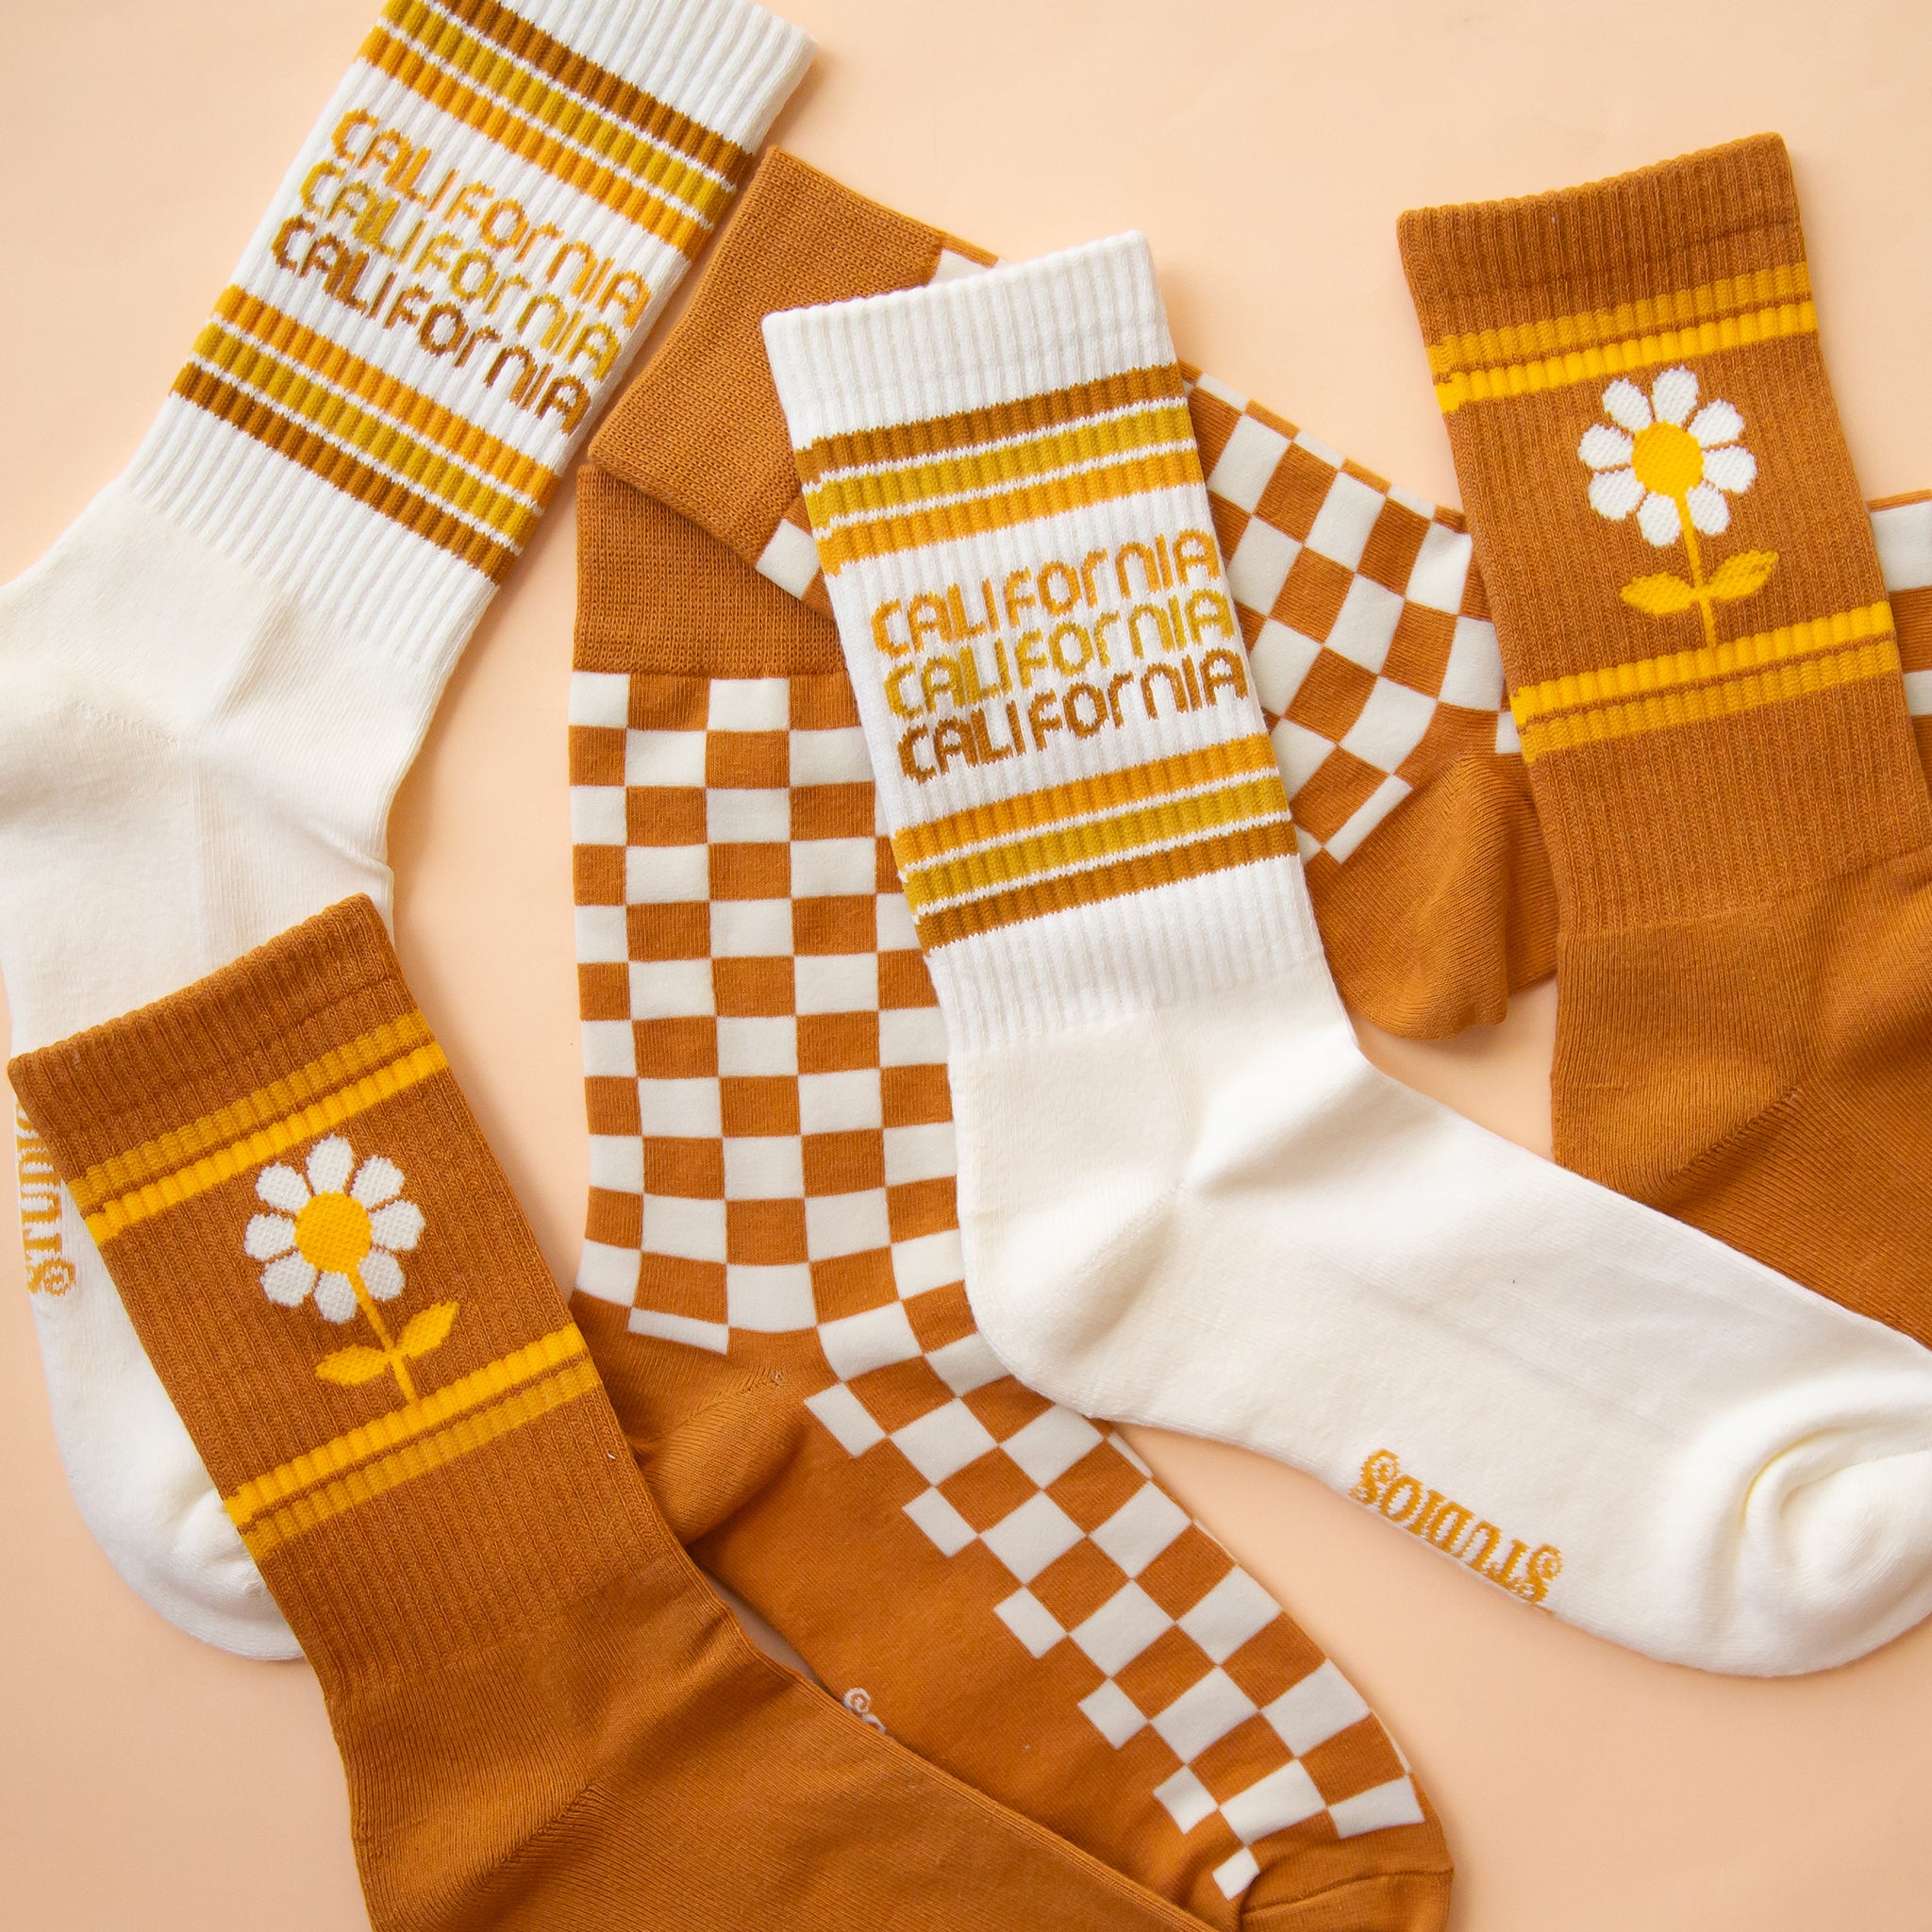 The different socks available on our website.